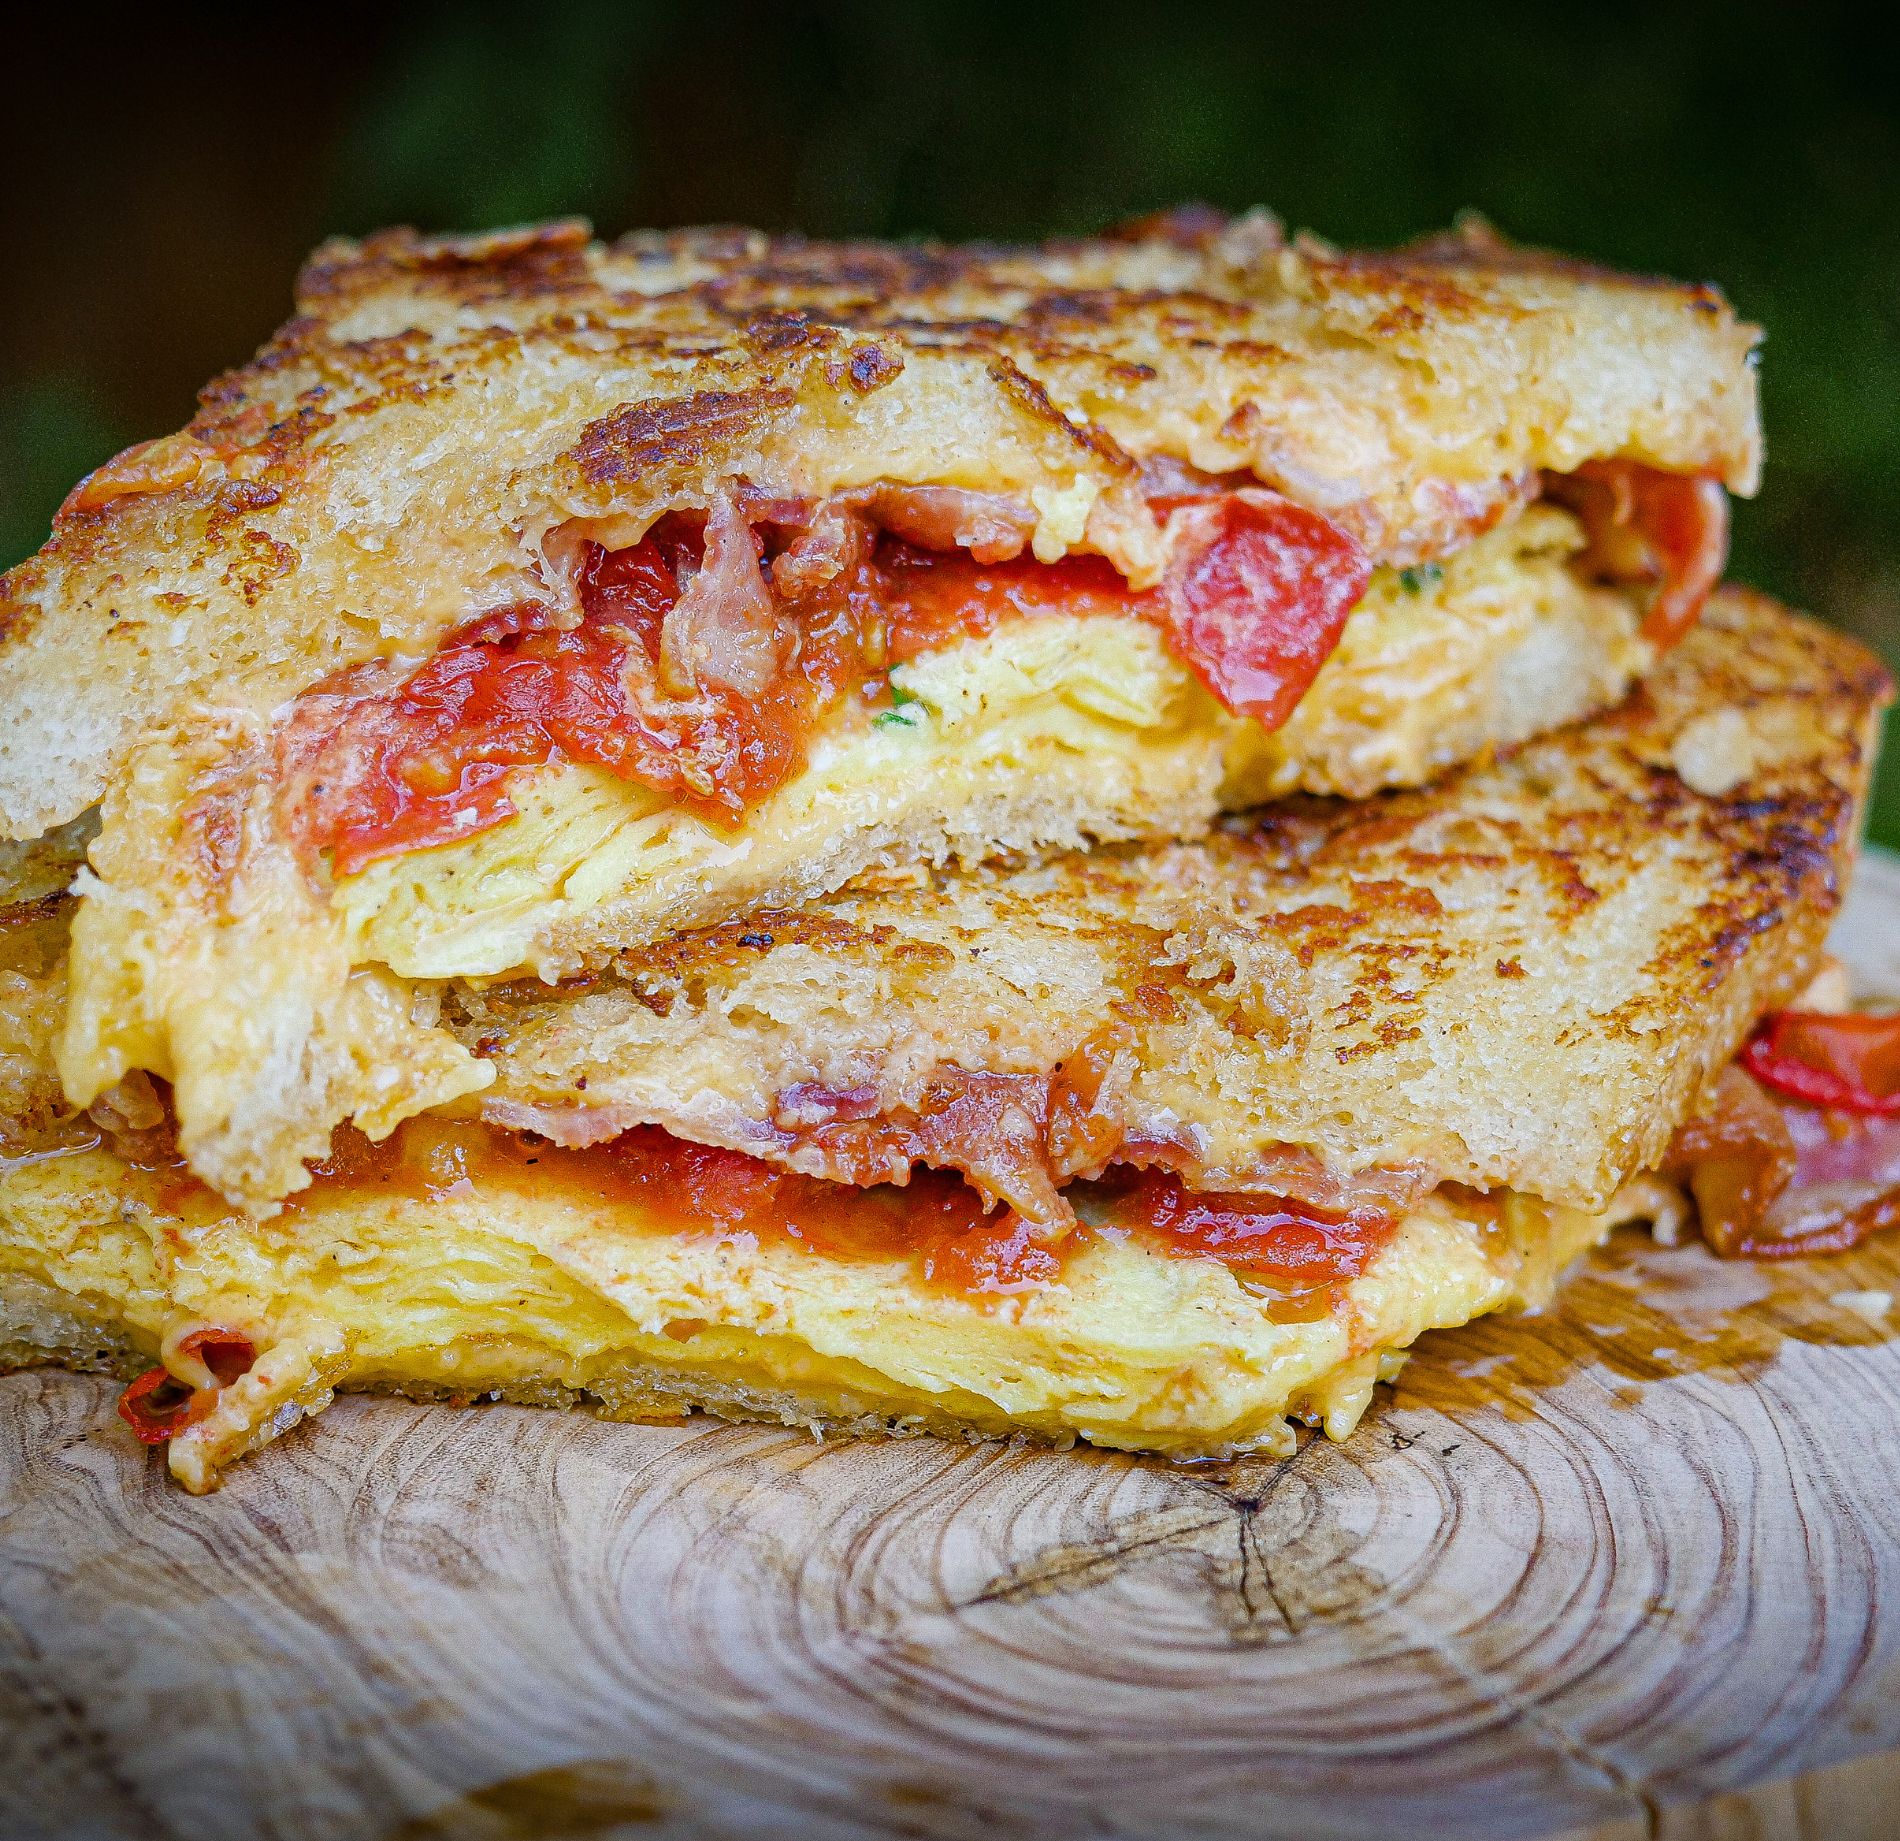 https://cookingsessions.com/wp-content/uploads/2022/08/Grilled-Breakfast-Sandwich-Recipe.jpg